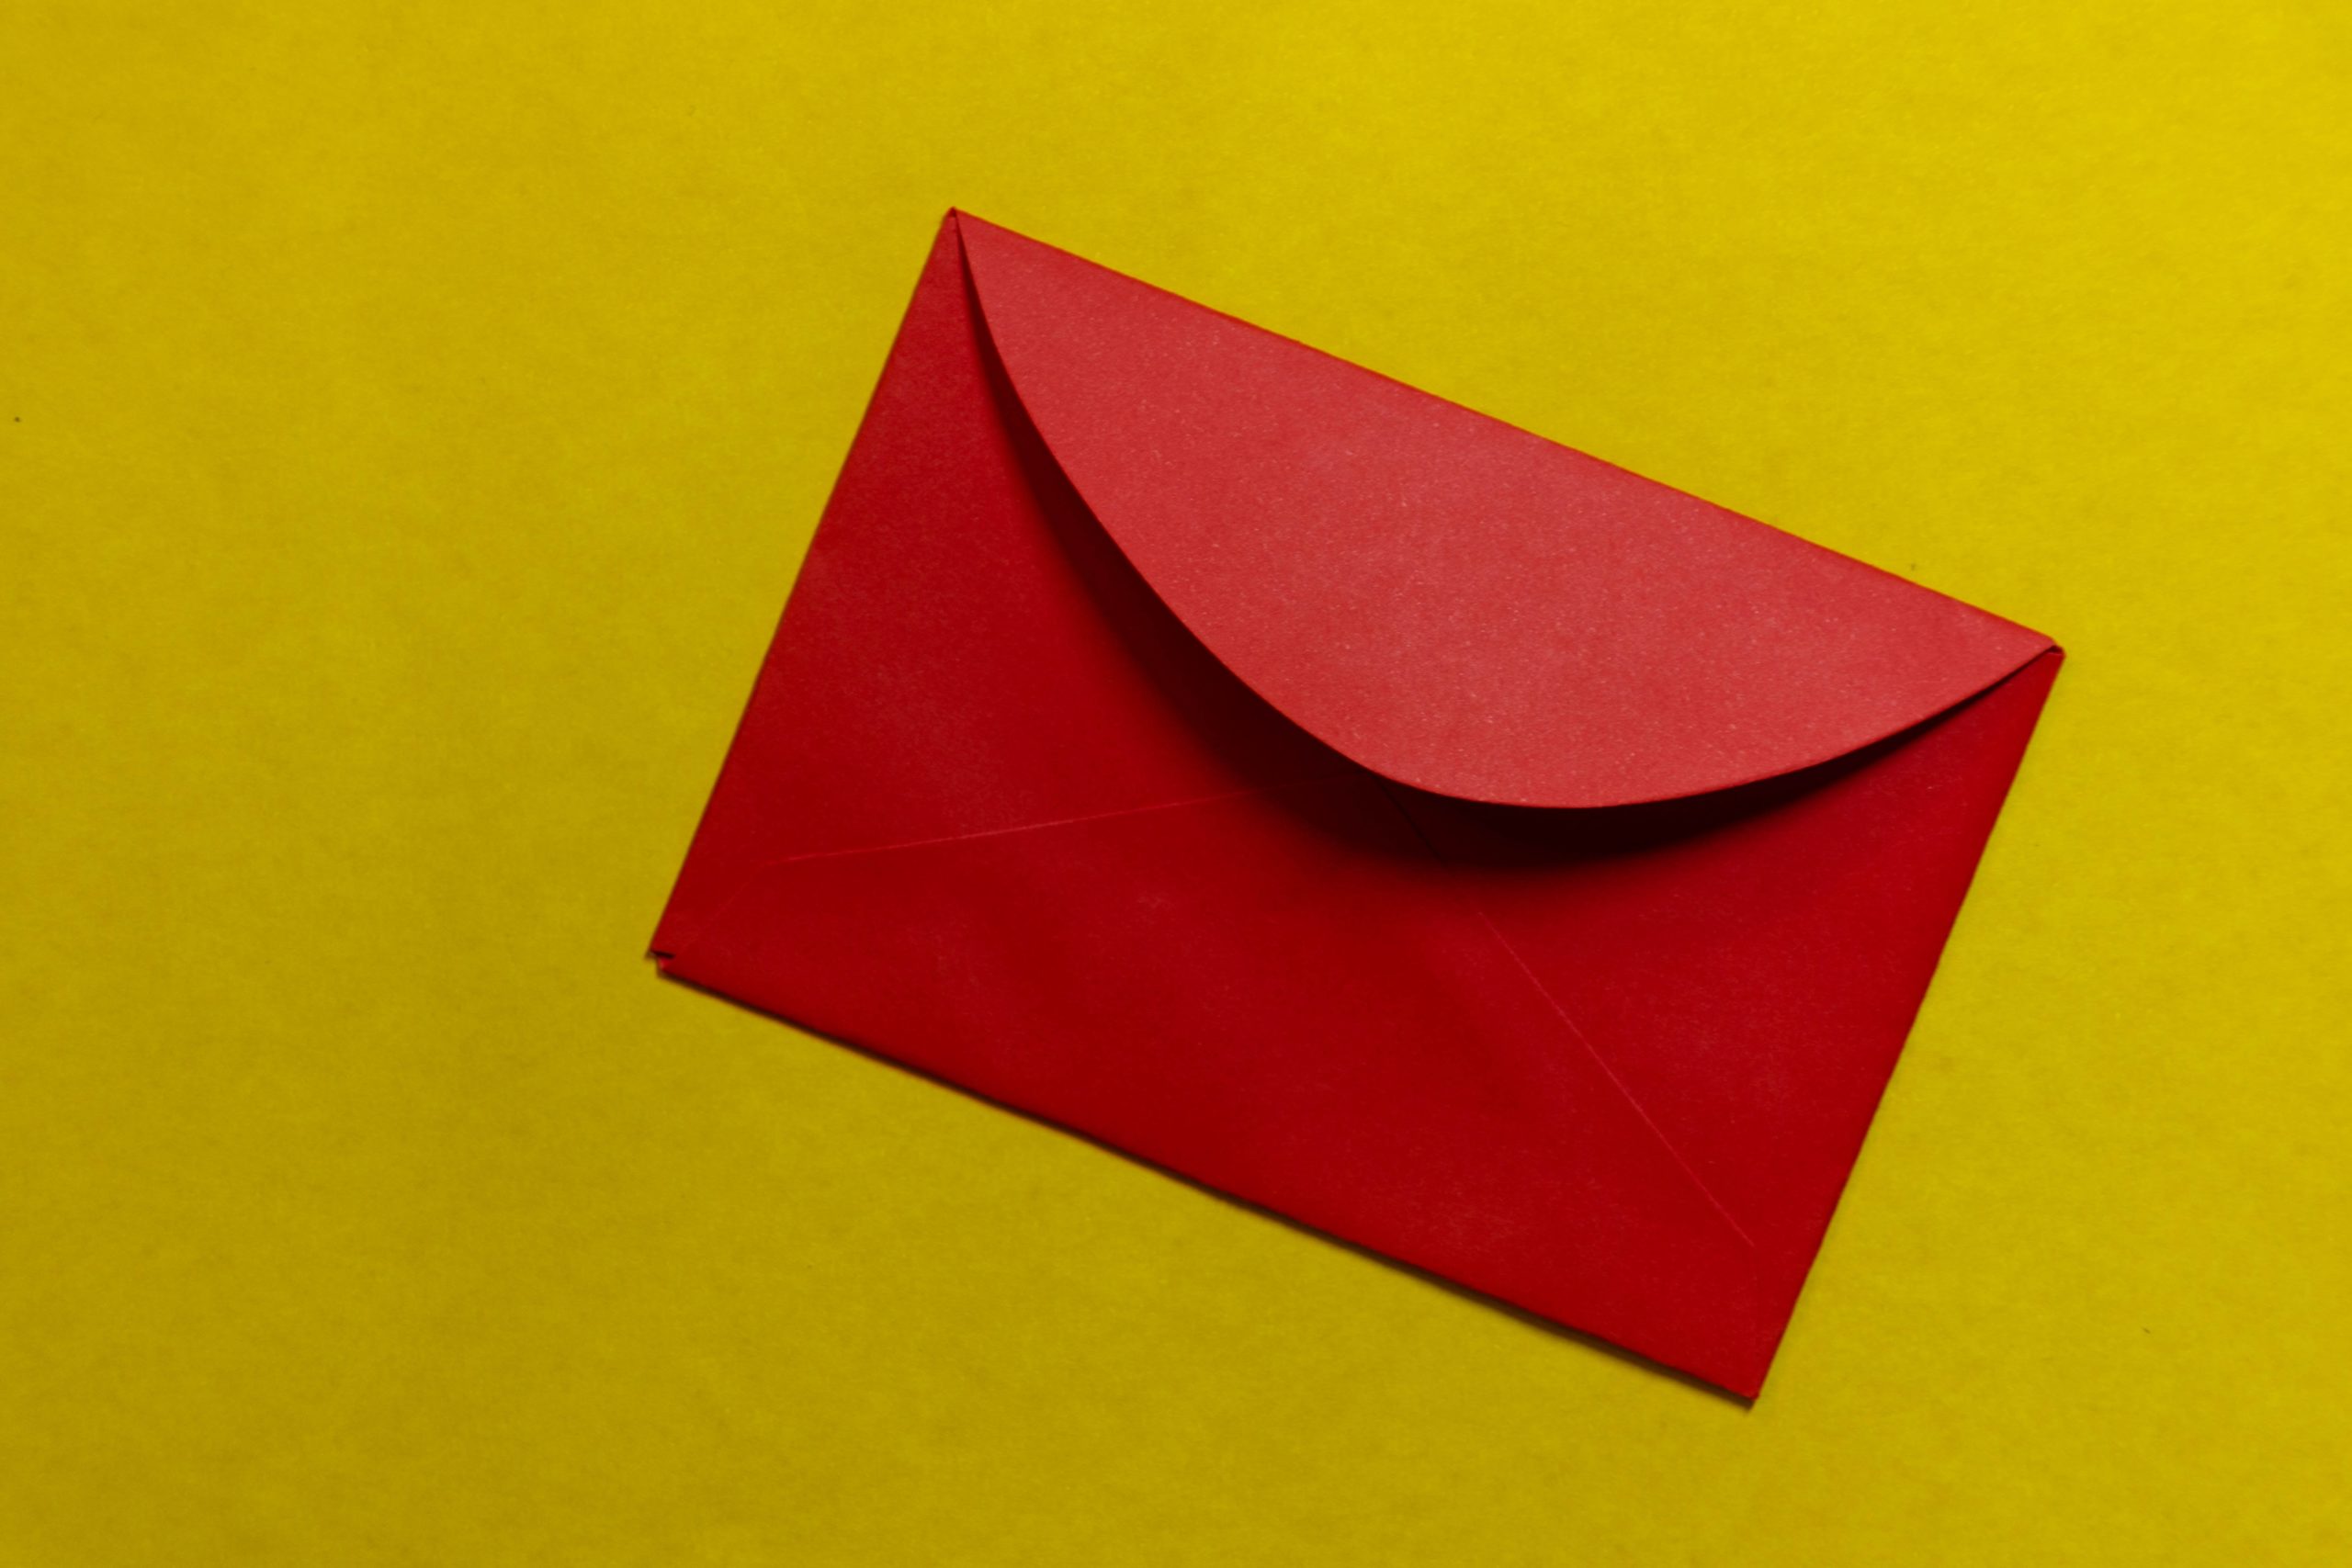 red paper on yellow surface